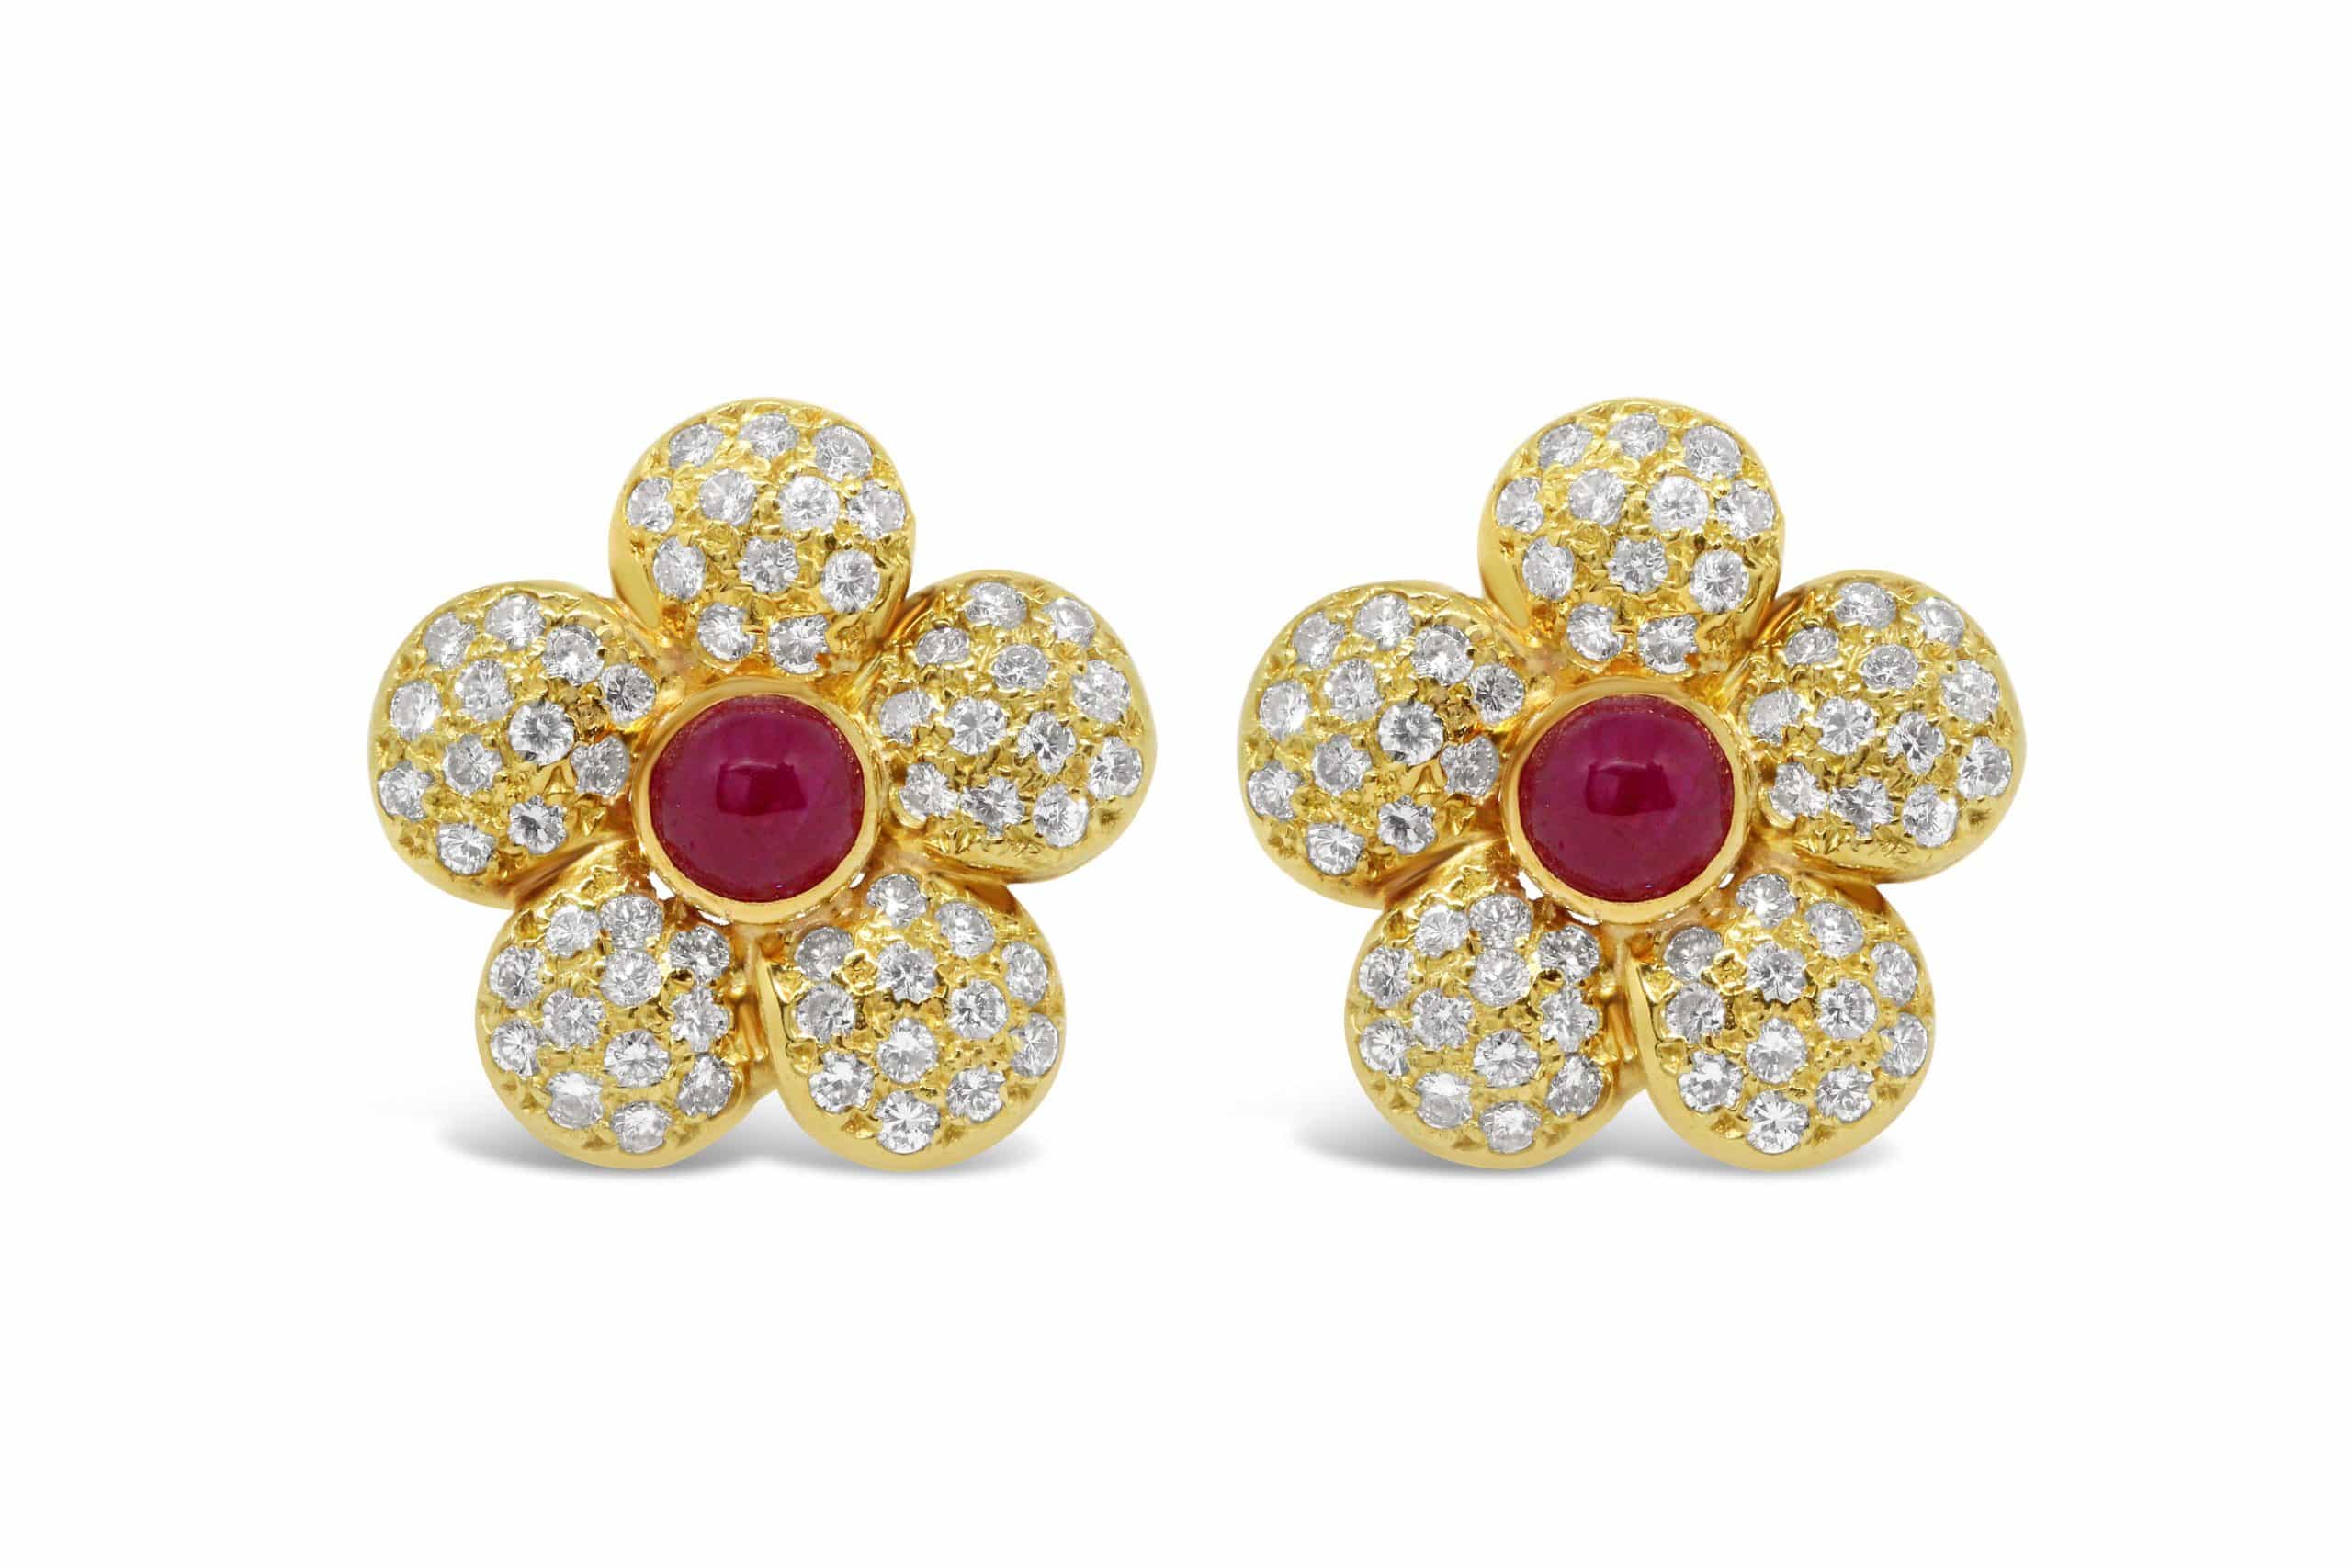 Solid 14k White Gold Simulated CZ and Cabochon Ruby Earrings - Walmart.com